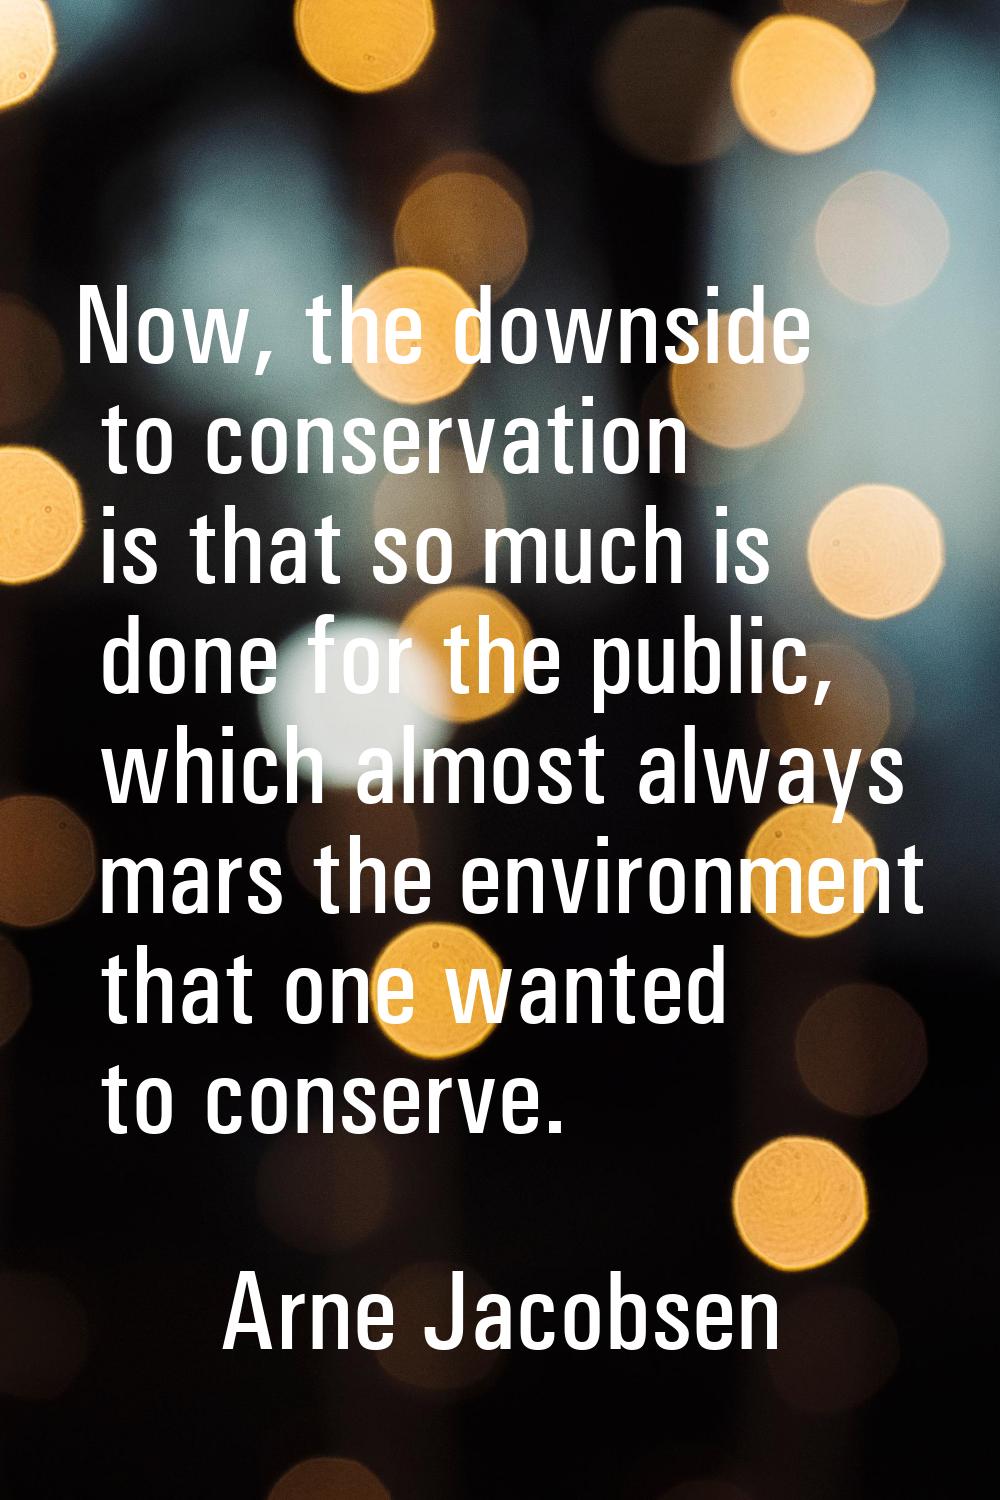 Now, the downside to conservation is that so much is done for the public, which almost always mars 